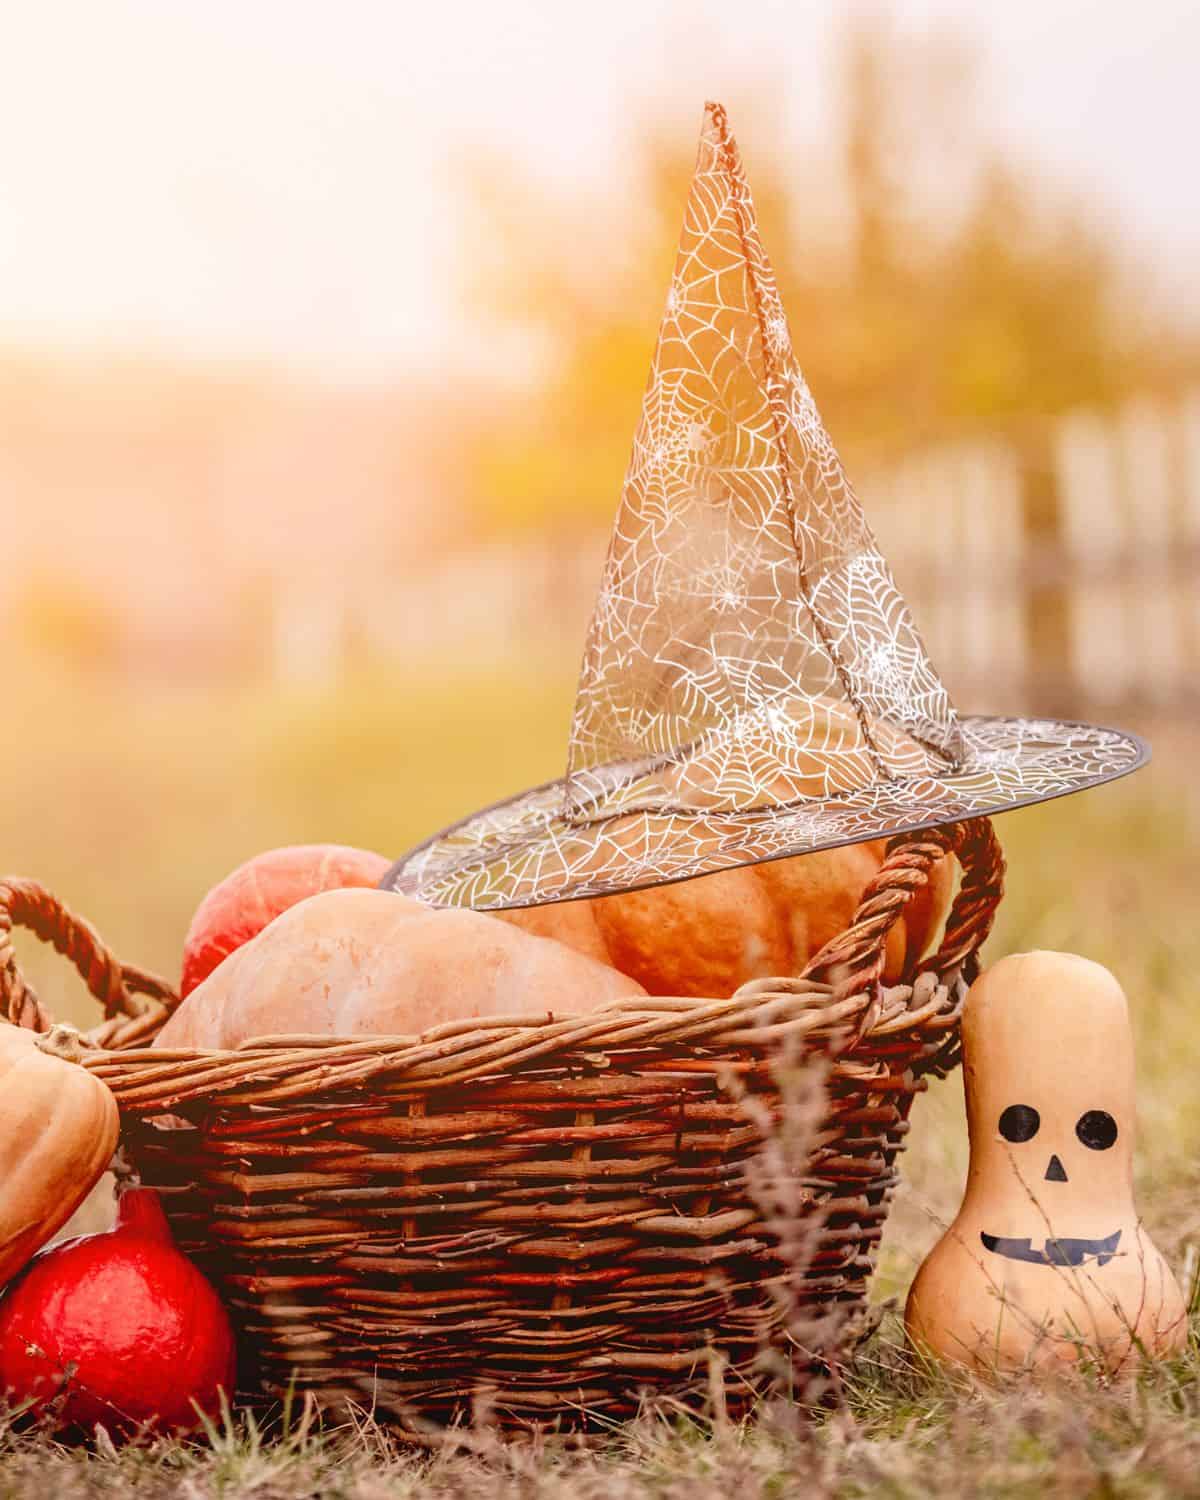 Image of a basket of halloween pumpkins and squash with a witches hat on top. The squash has a face drawn onto it and the witches hat is see though lace.